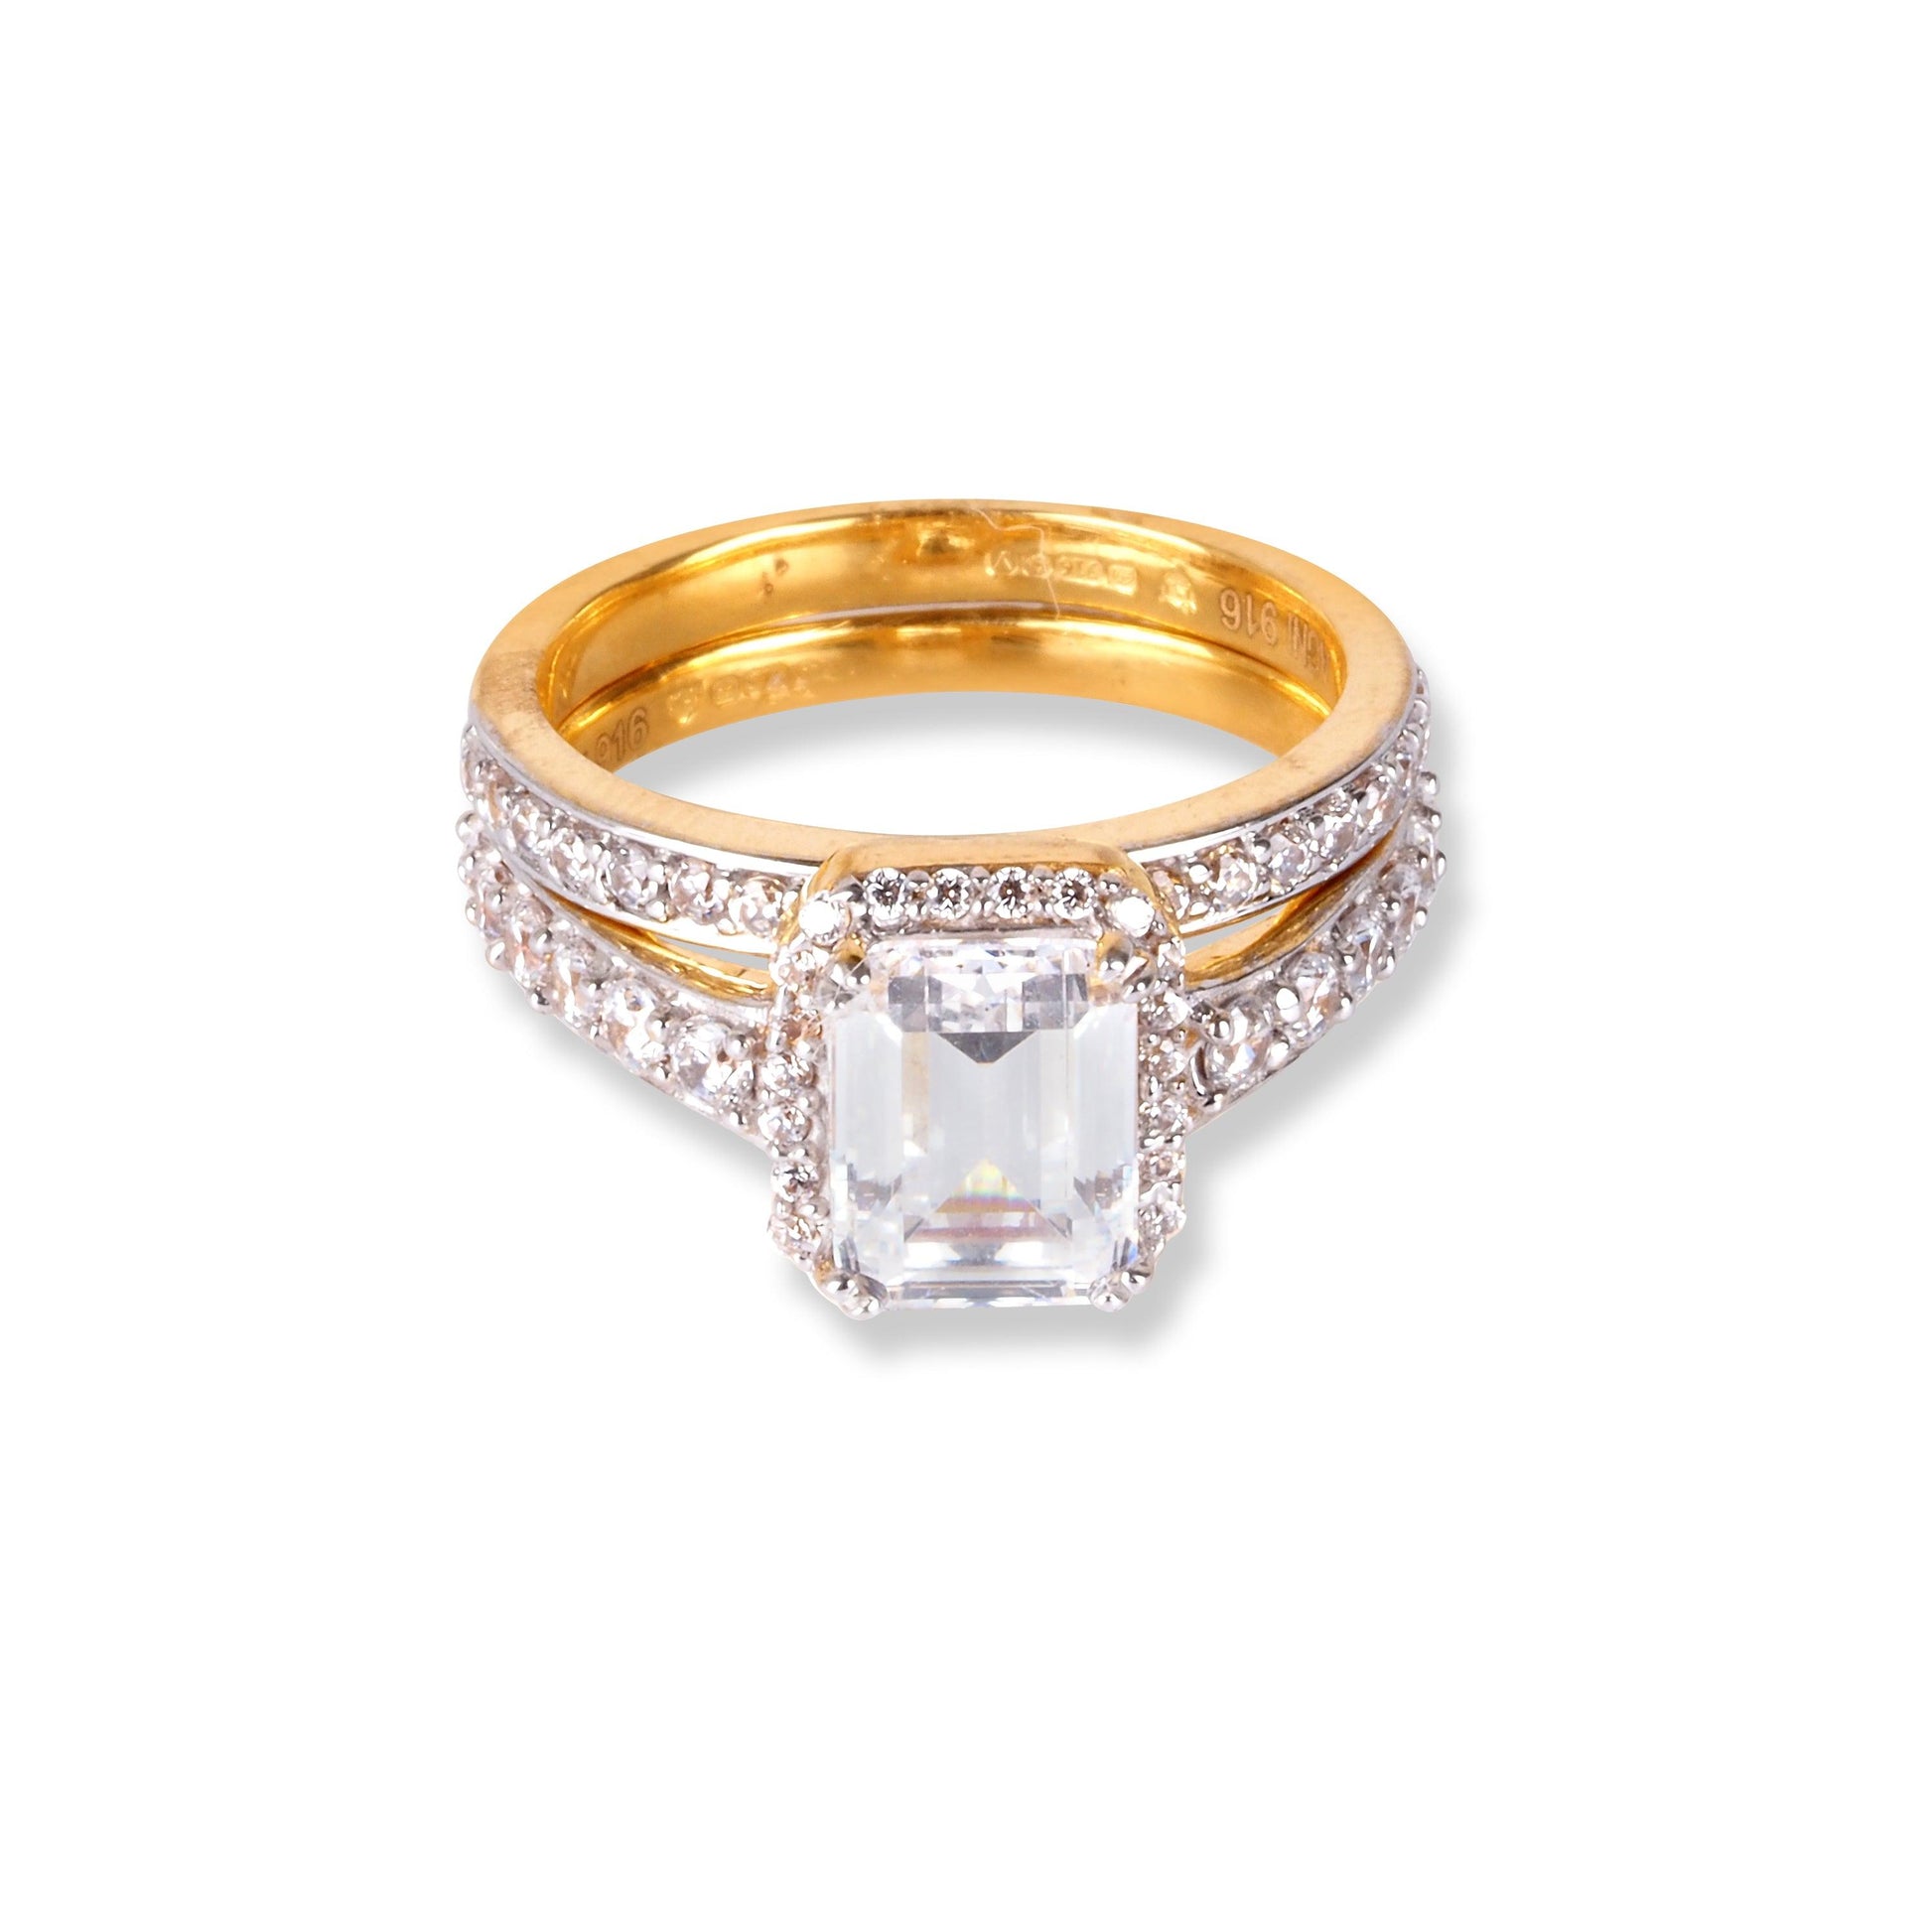 22ct Gold Engagement Ring and Wedding Band Set with Swarovski Zirconia Stones LR-6634 - Minar Jewellers